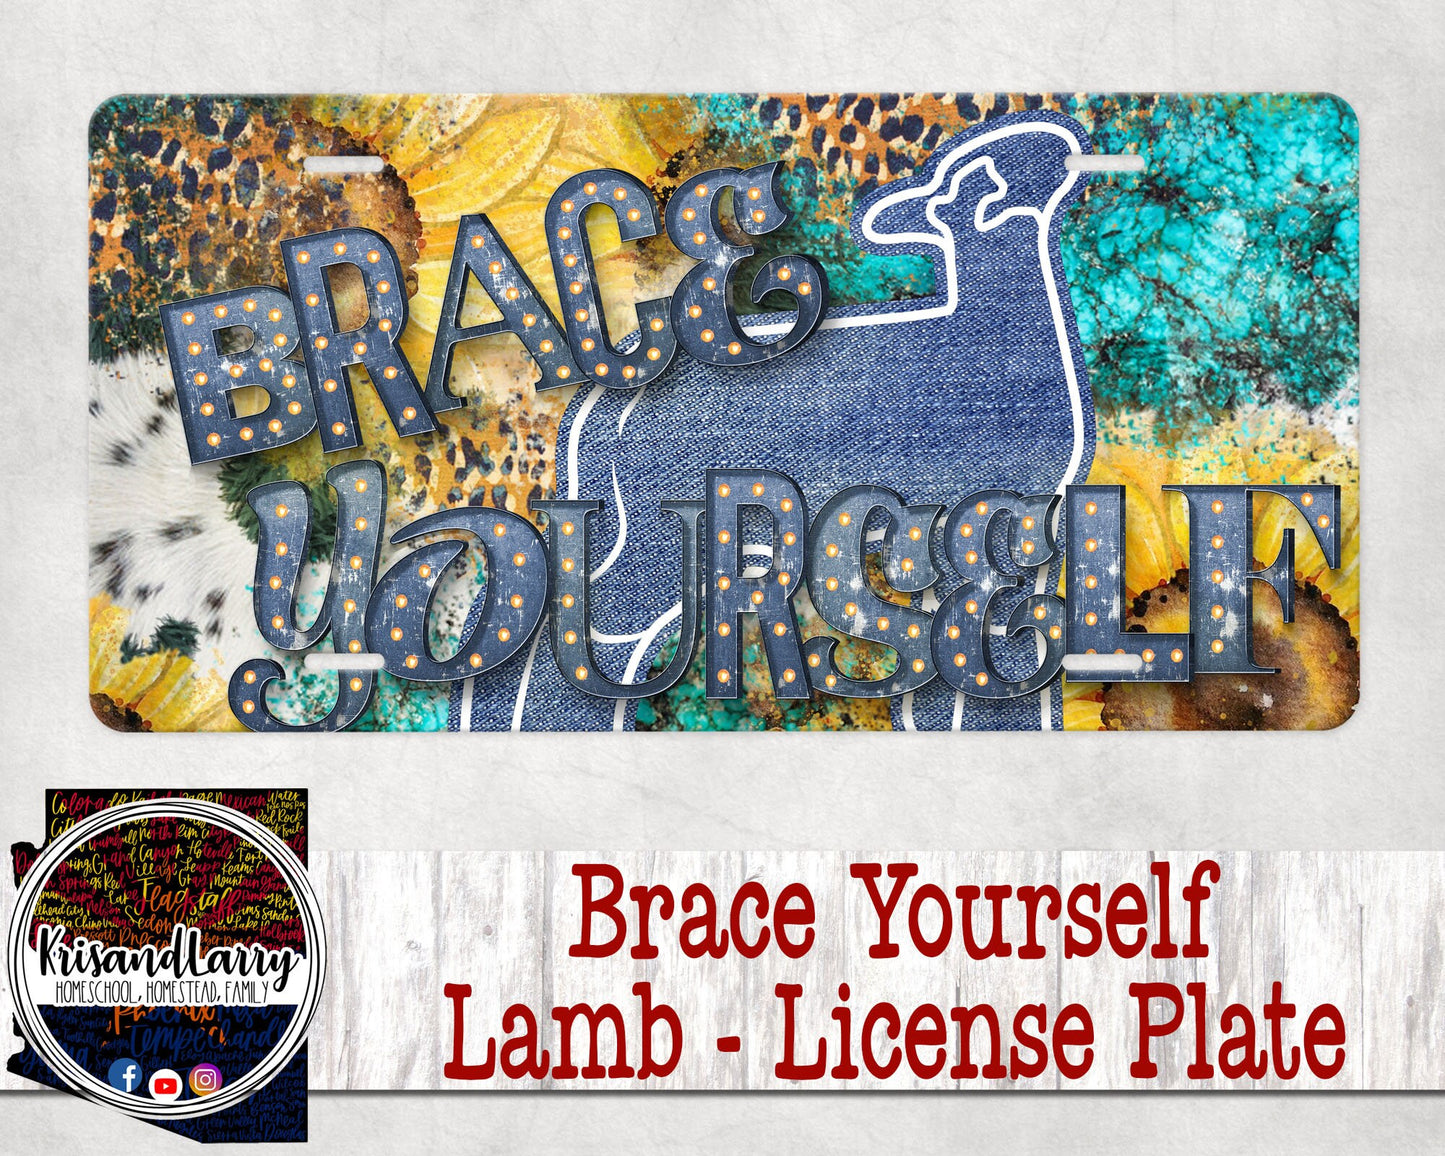 Brace Yourself - Showing LAMB Livestock License Plate,